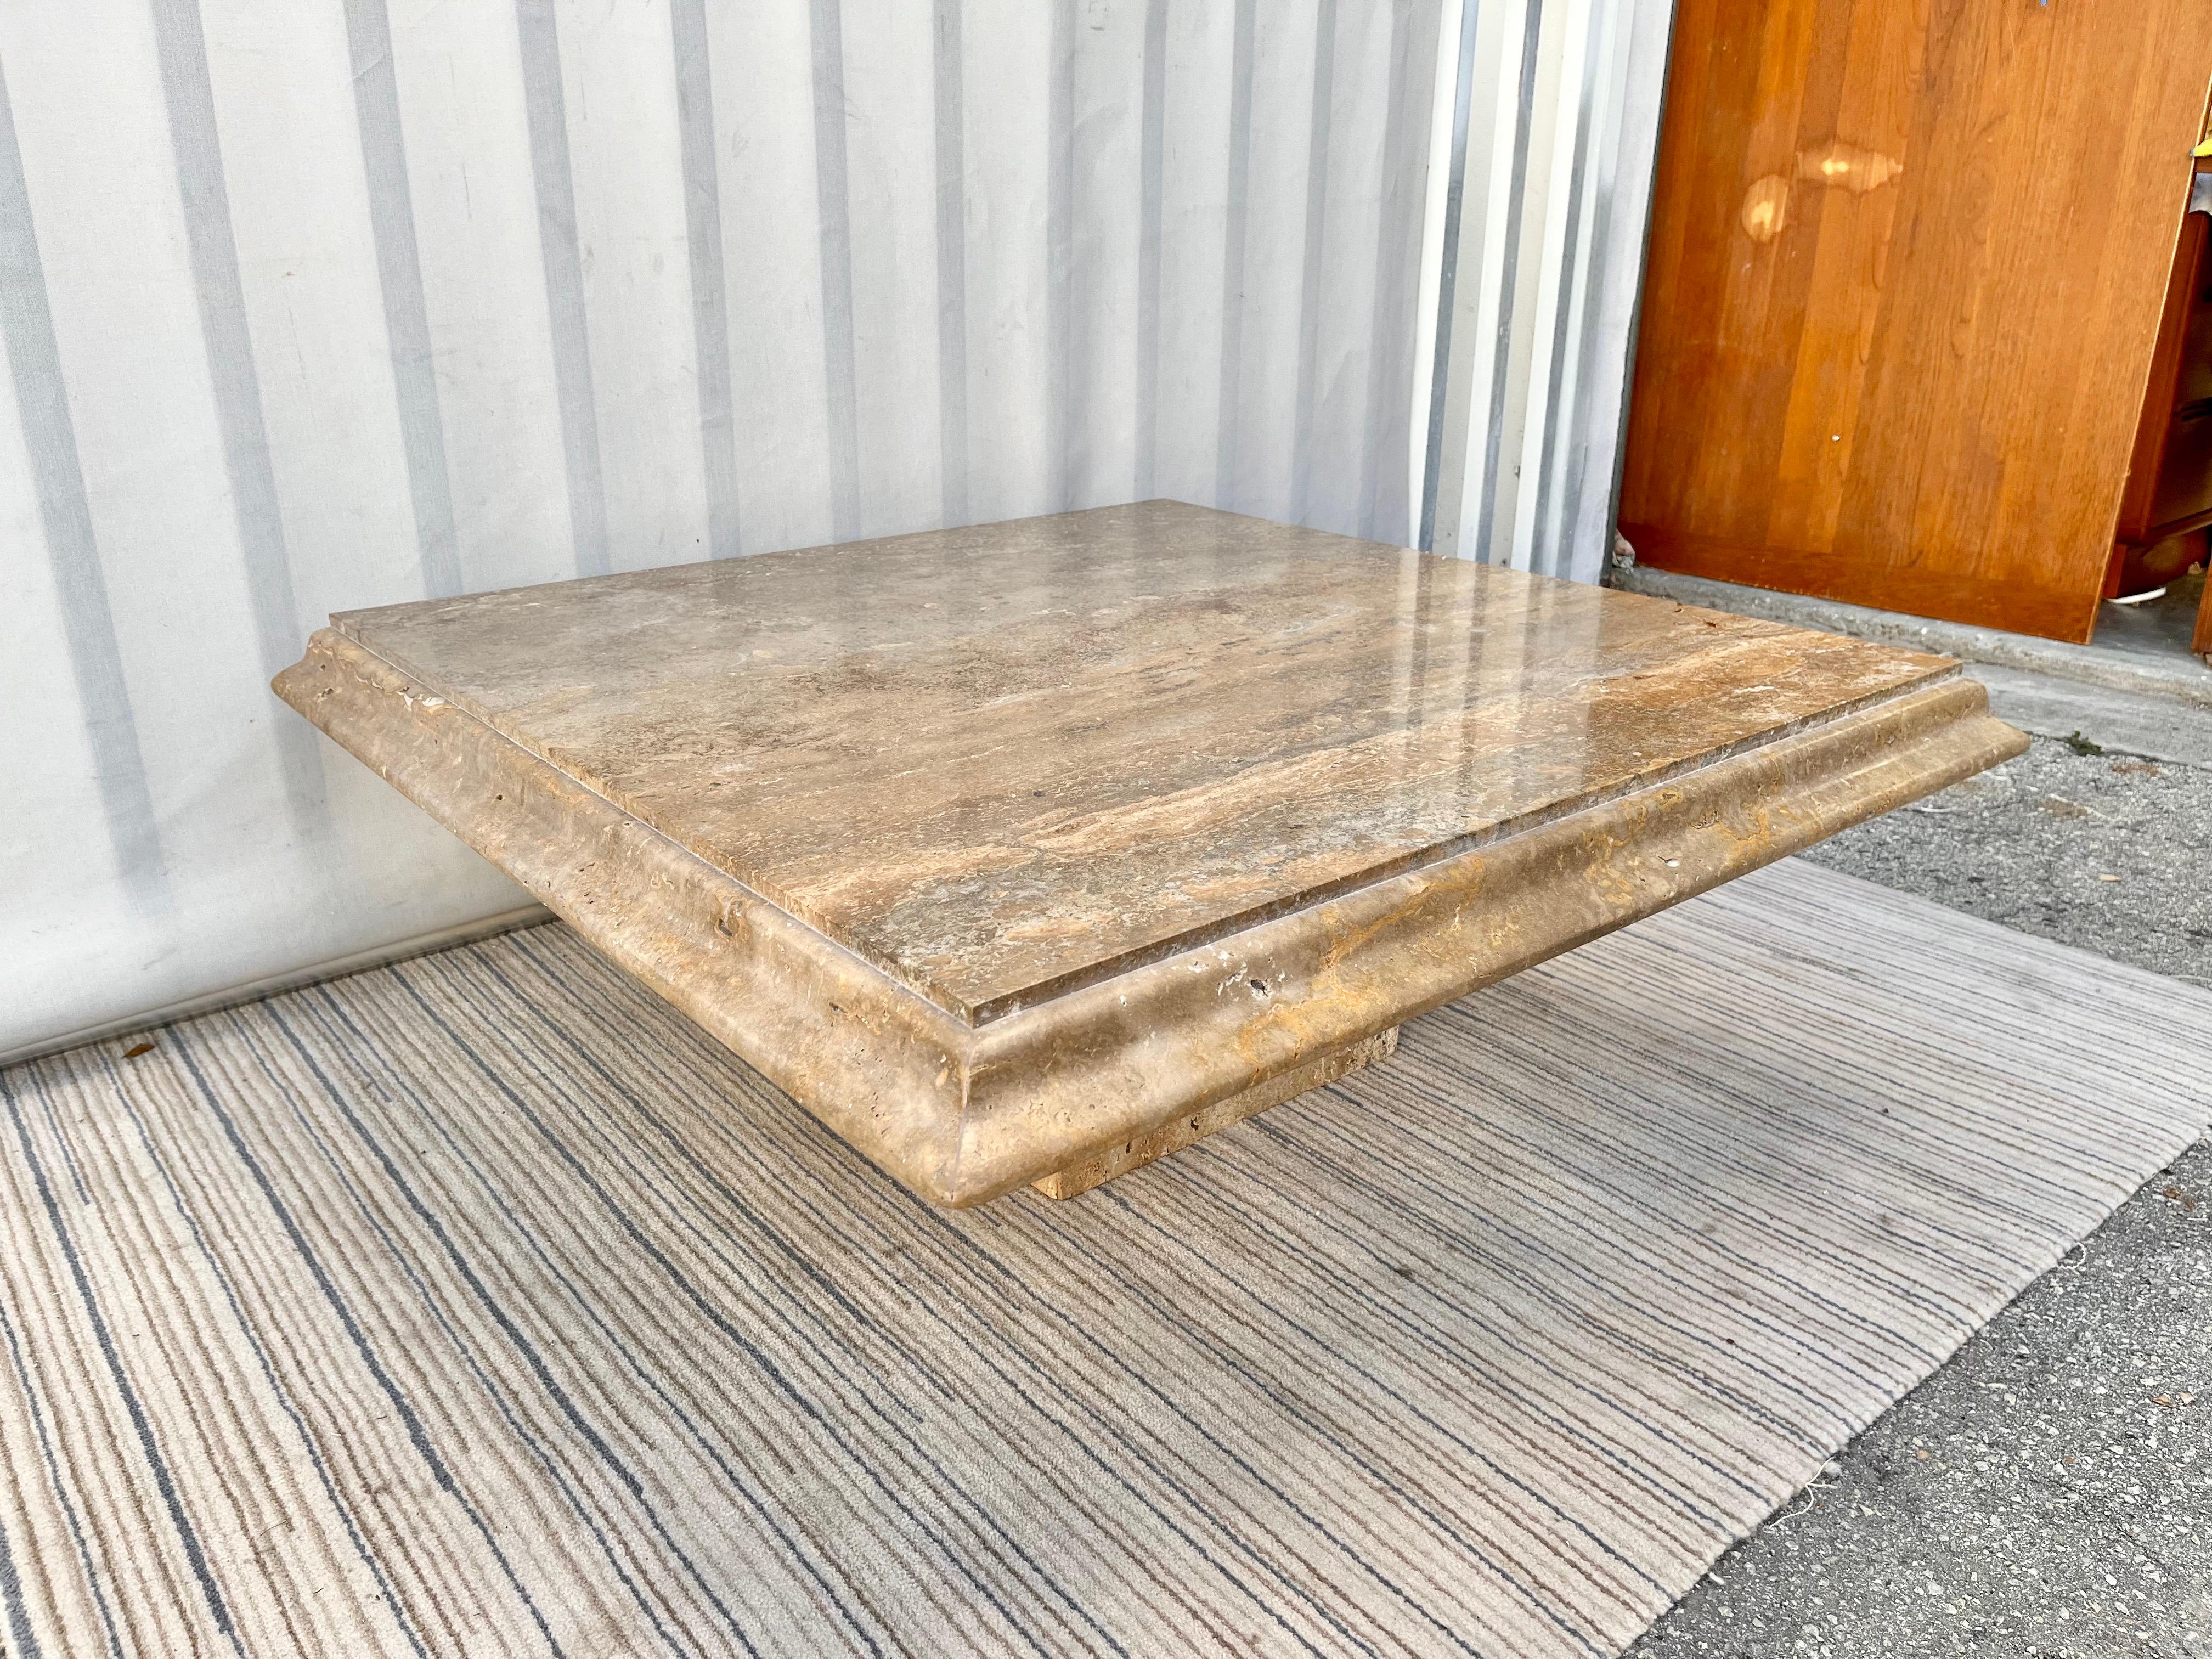 1980s Postmodern Italian Travertine Coffee Table by Stone Intentional, Italy In Good Condition For Sale In Miami, FL